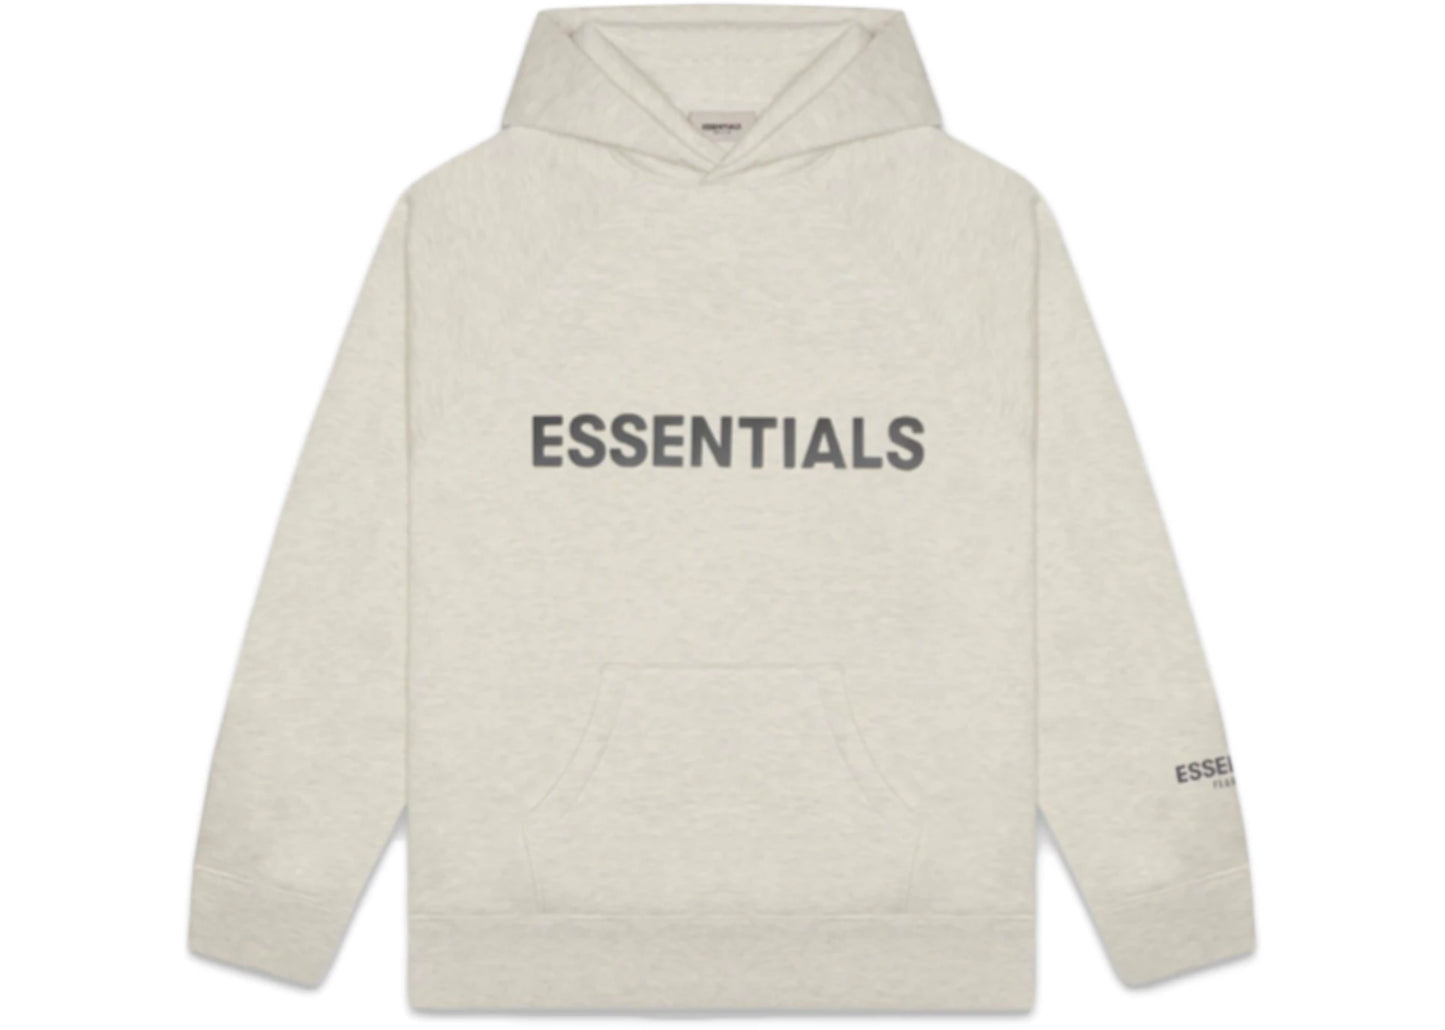 Fear of God Essentials 3D Silicon Applique Pullover Hoodie Oatmeal/Oatmeal Heather/Light Heather Oatmeal